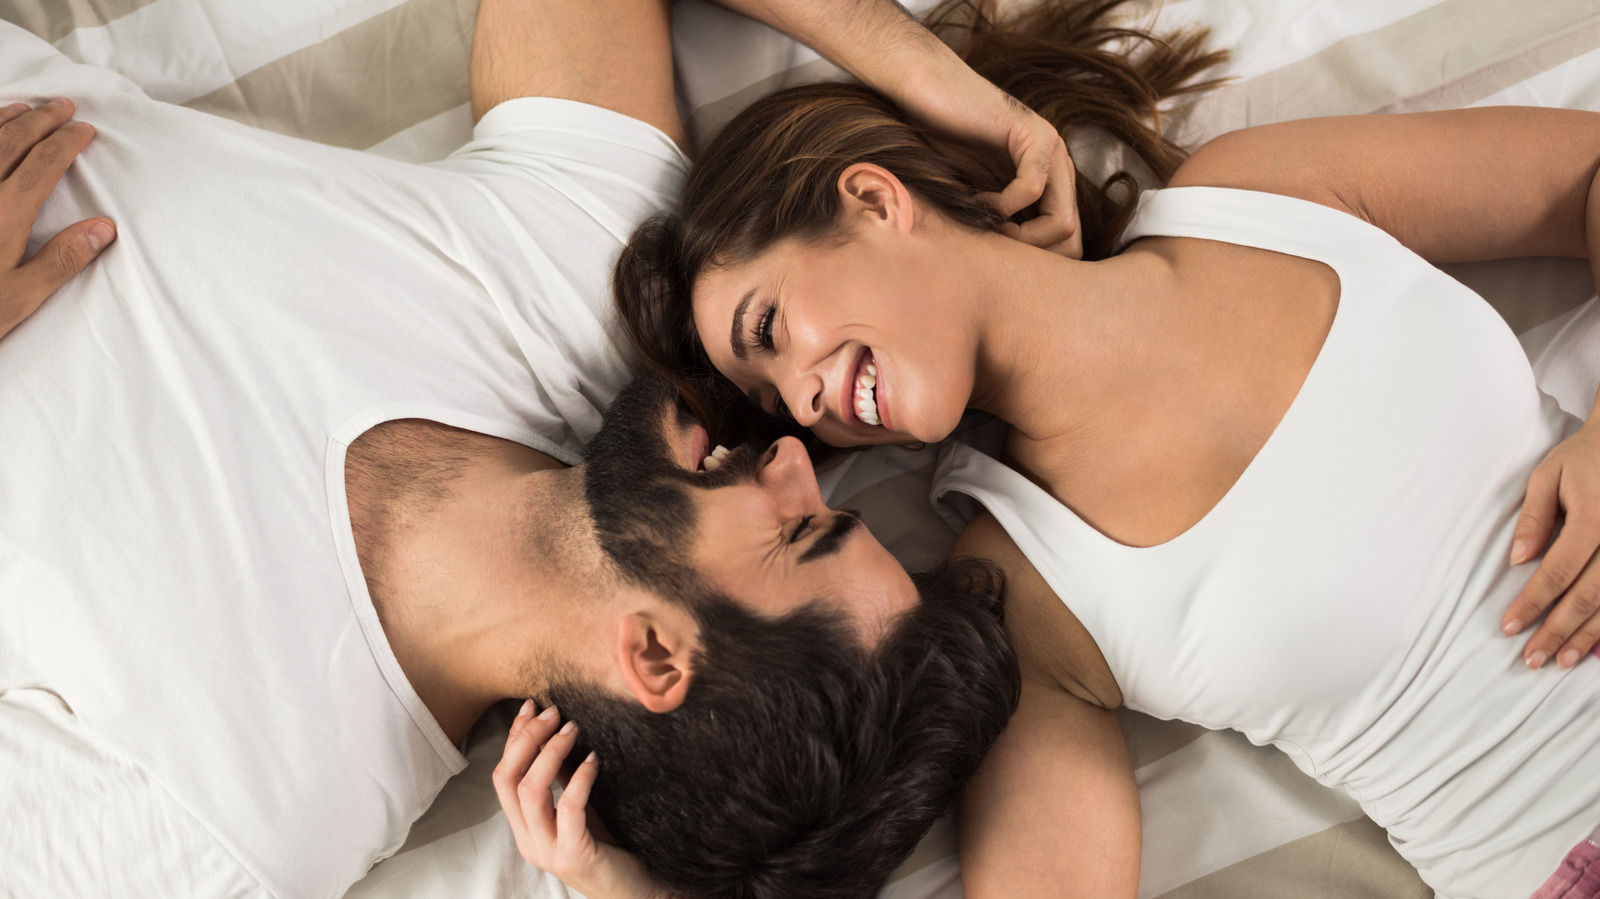 5 Benefits Of Bringing Toys Into Your Sex Life (Beyond Making You Feel Good)